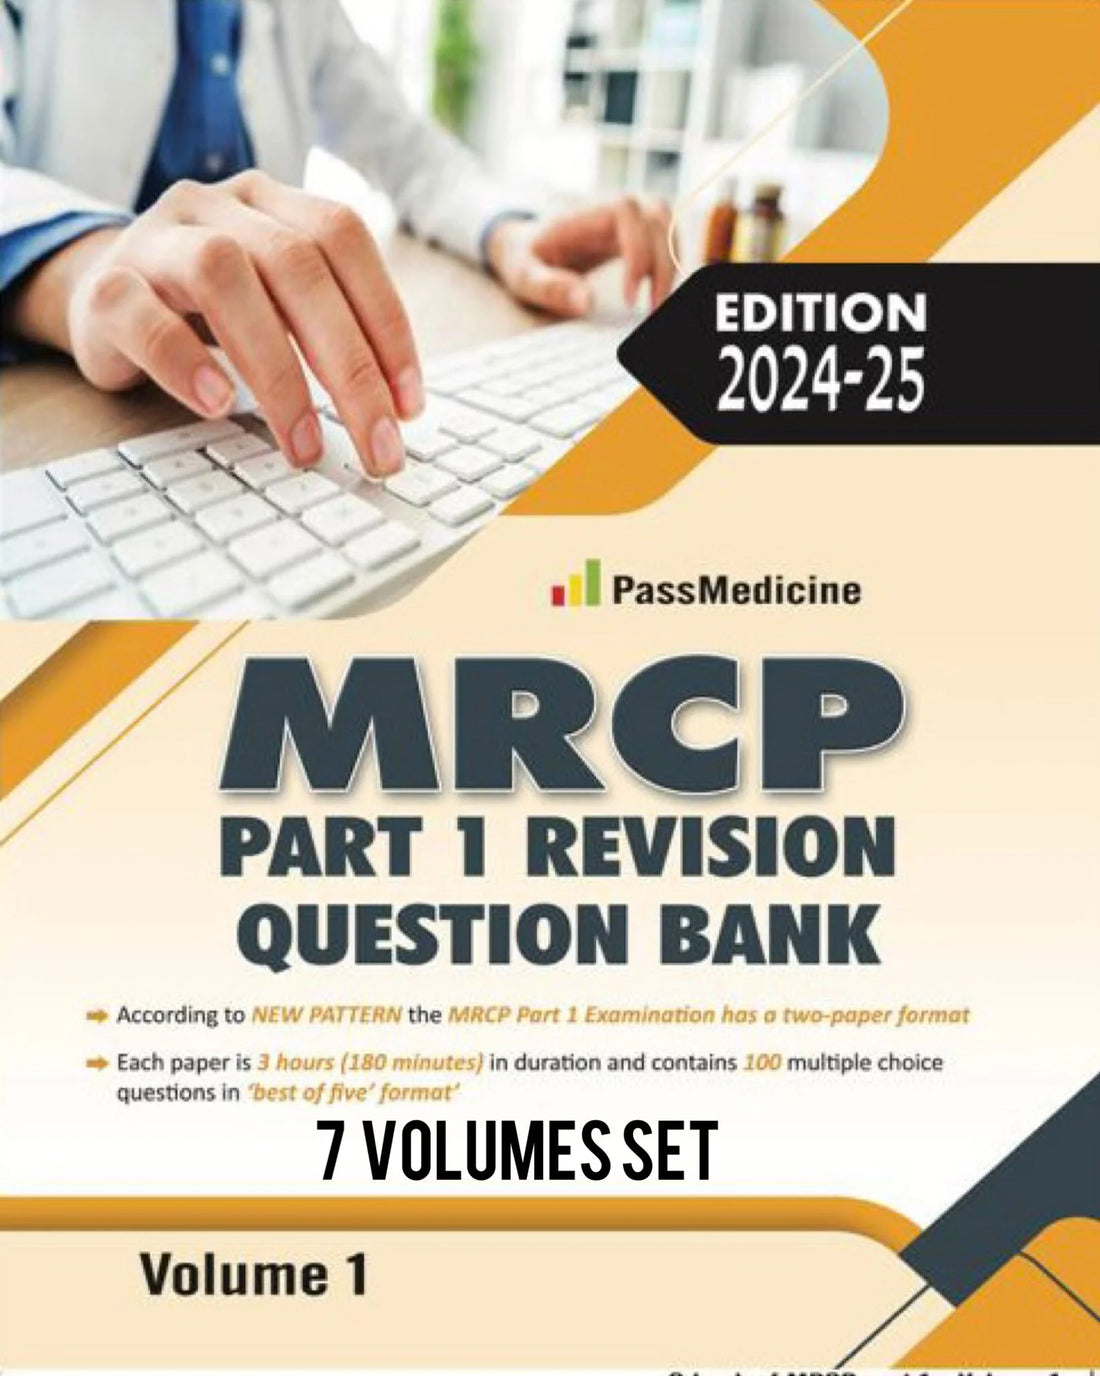 Mastering MRCP Part 1: Your Key to Success with PassMedicine Revision Question Bank